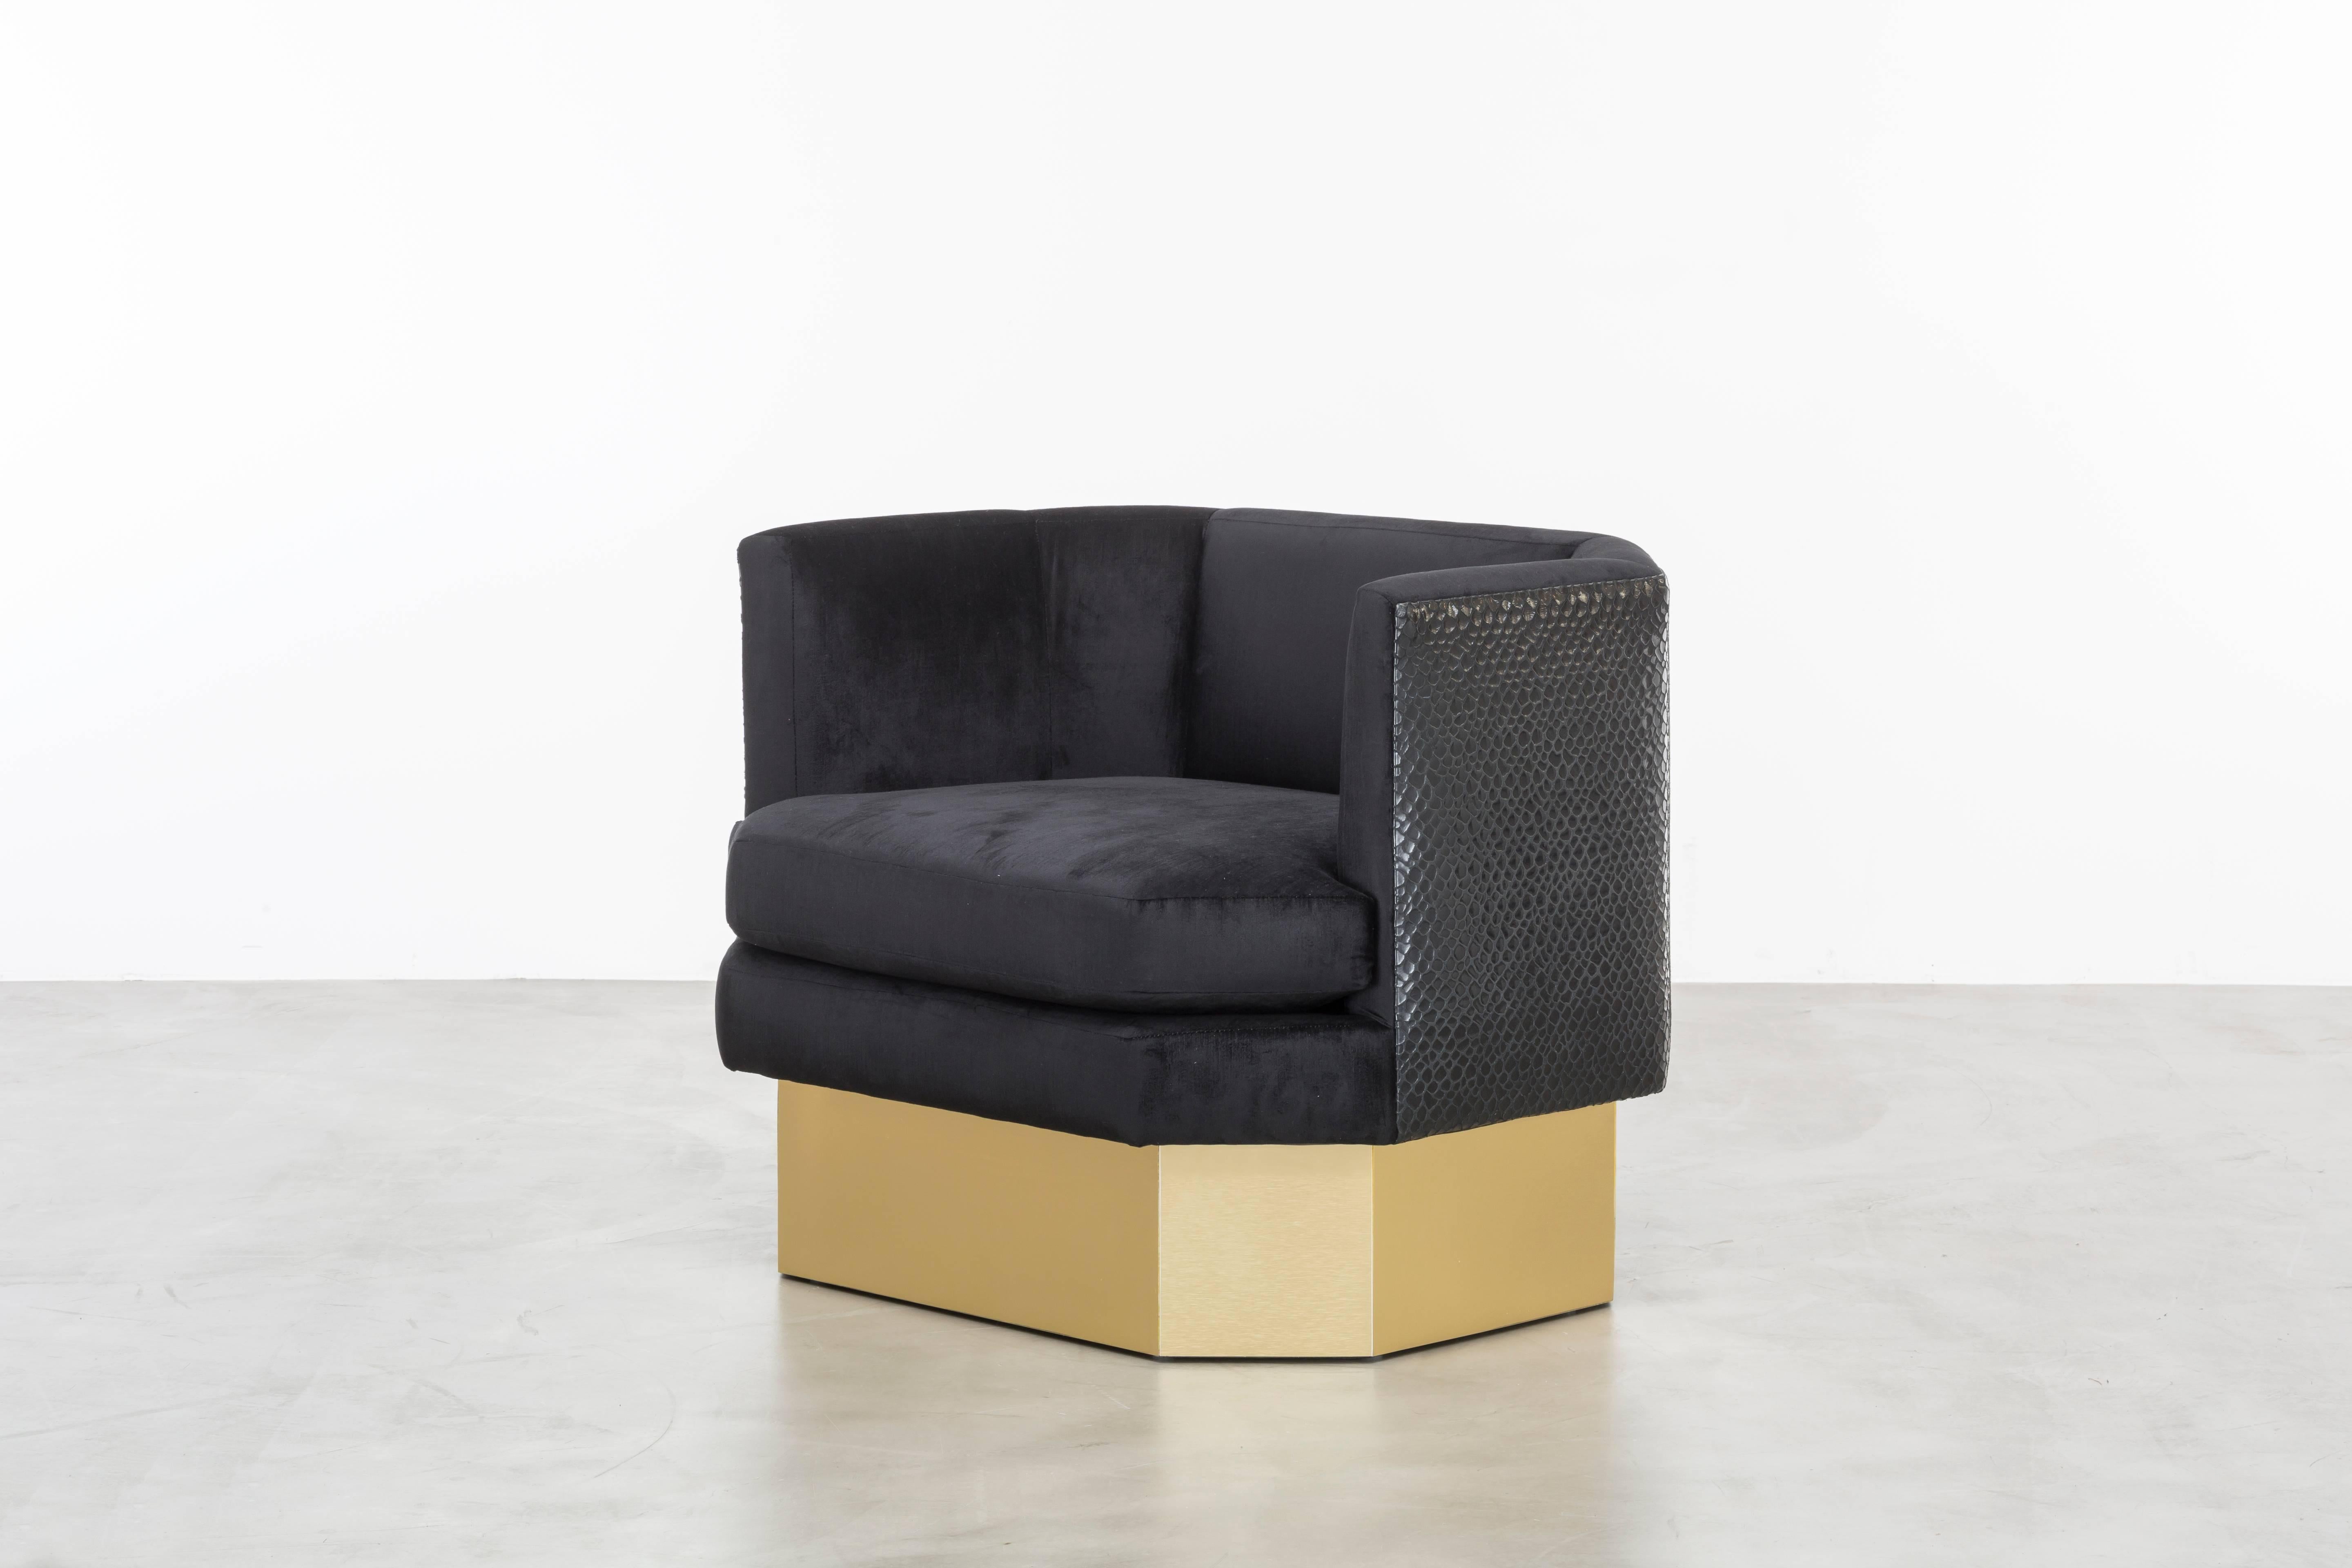 OCTAVE CHAIR- Modern Lounge Chair in Black Velvet

The Octave Chair is a stunning piece of furniture that features an octagonal-shaped upholstered velvet seat and back with contrast leather back panels. The chair sits atop a brushed brass plinth